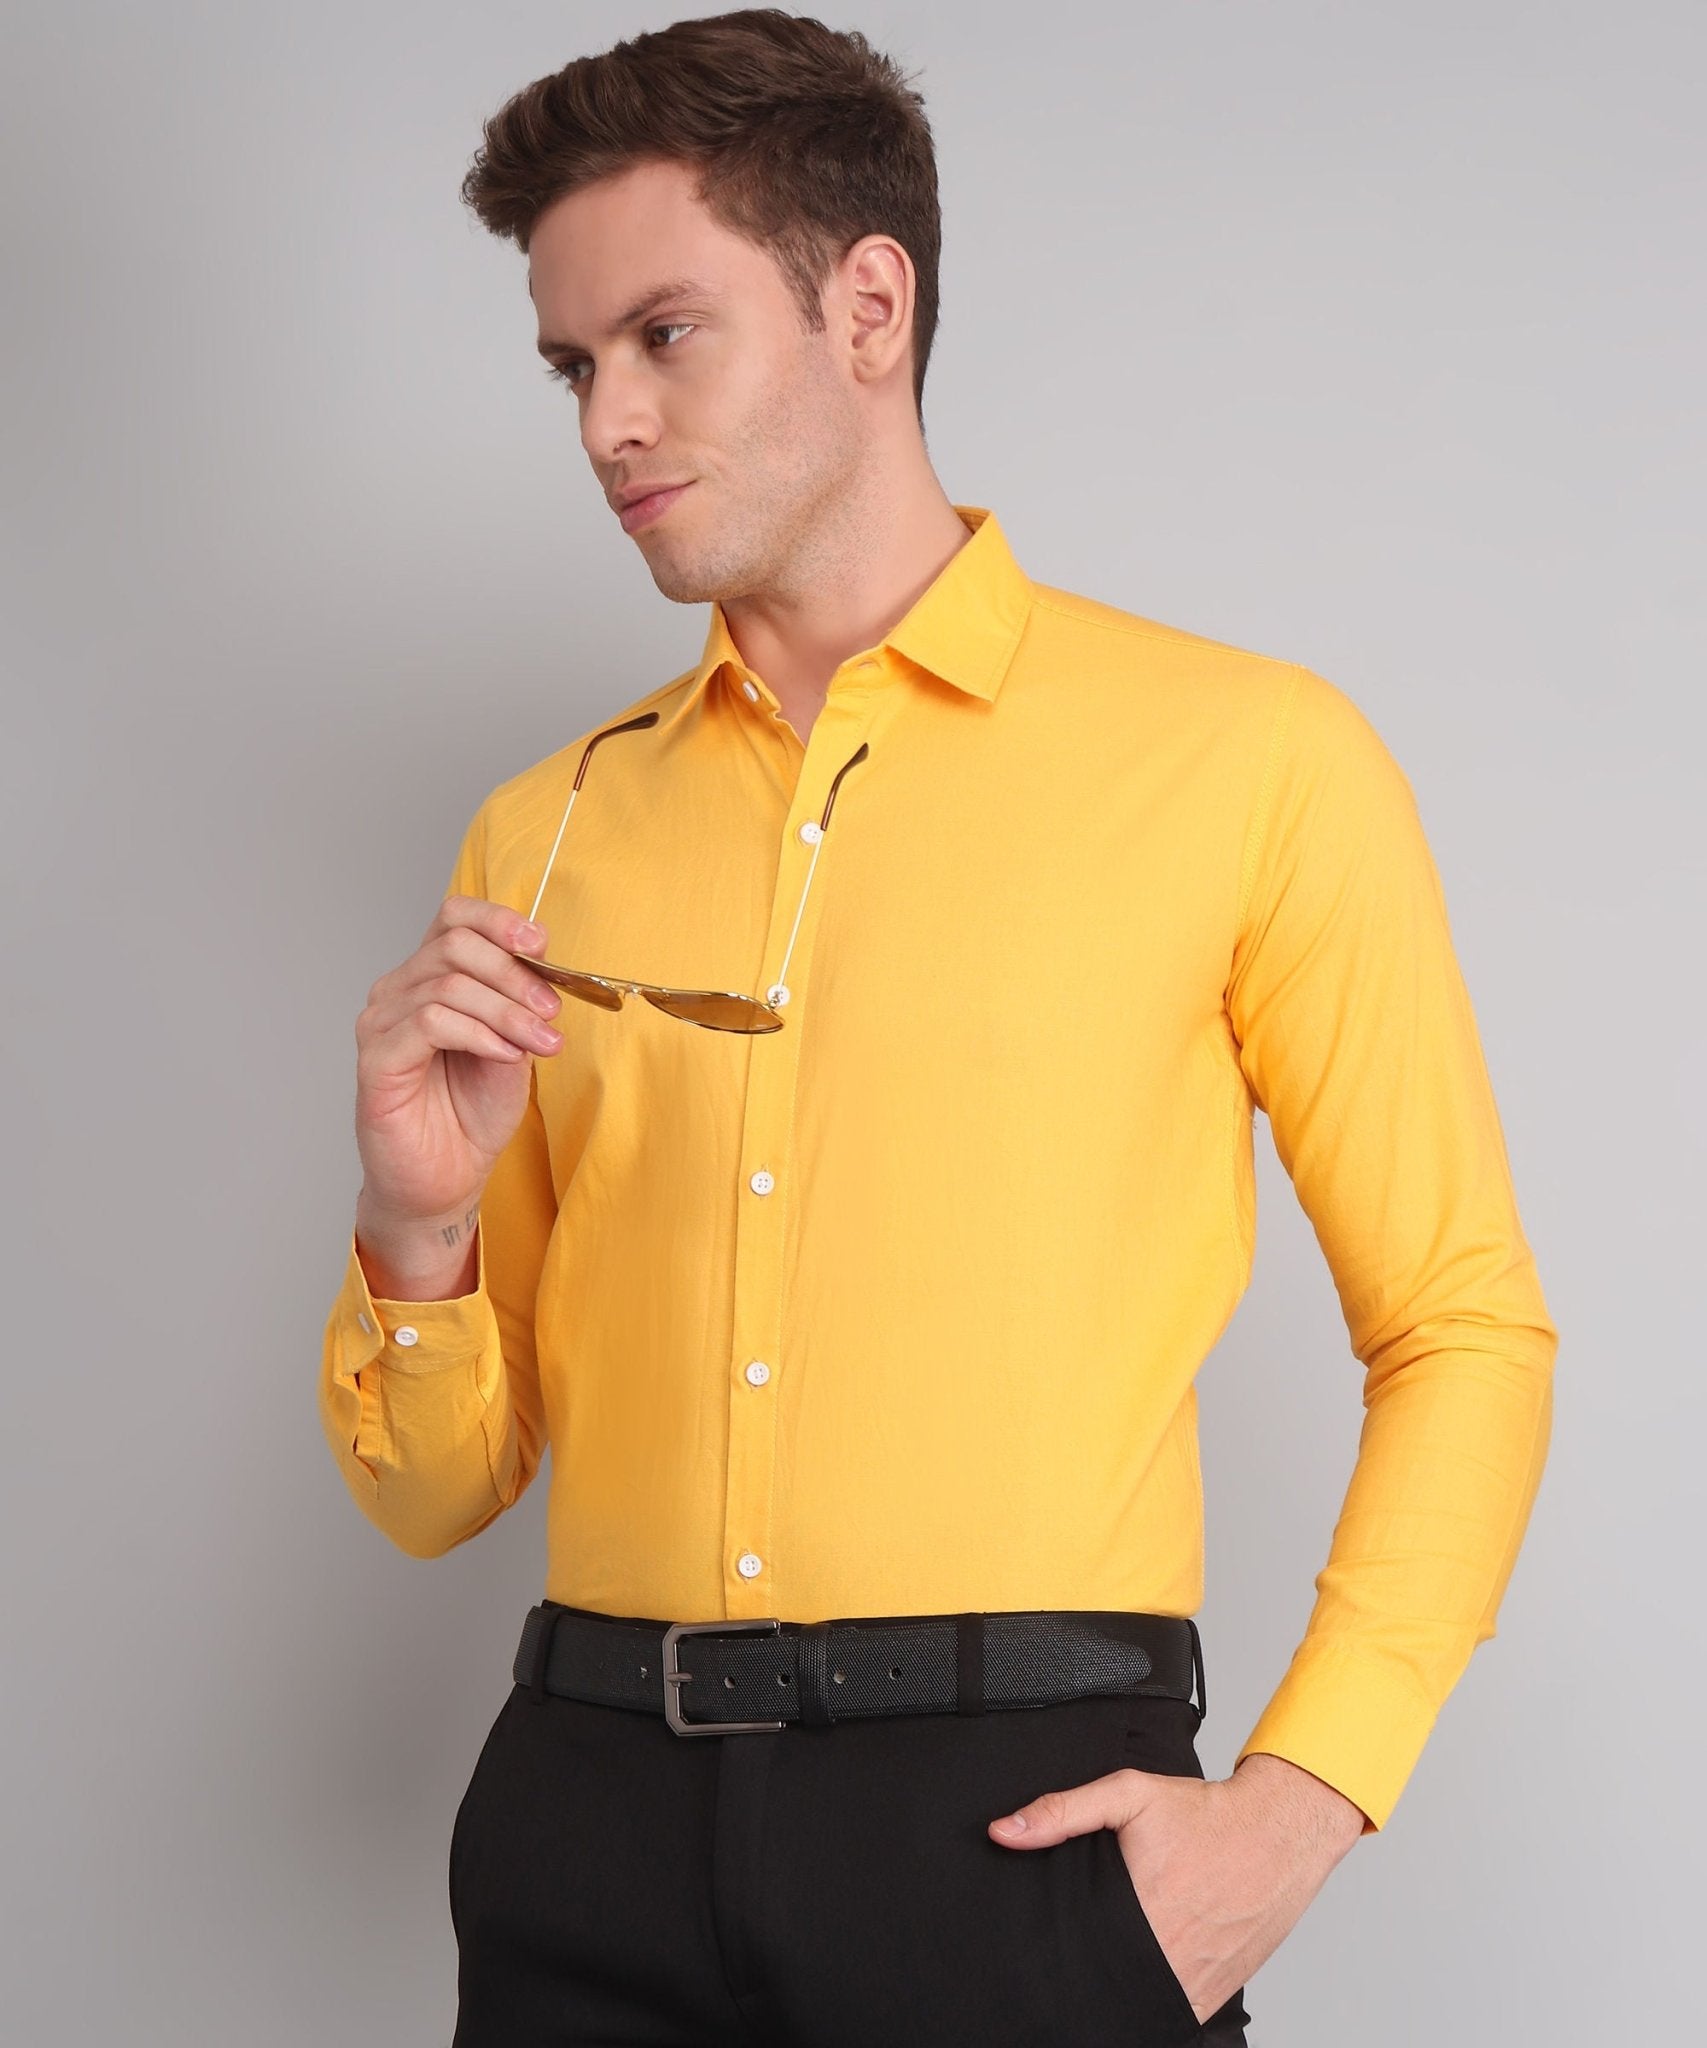 Luxurious Exclusive TryBuy Premium Wrinkle-Free Yellow Casual/Formal Shirt for Men - TryBuy® USA🇺🇸